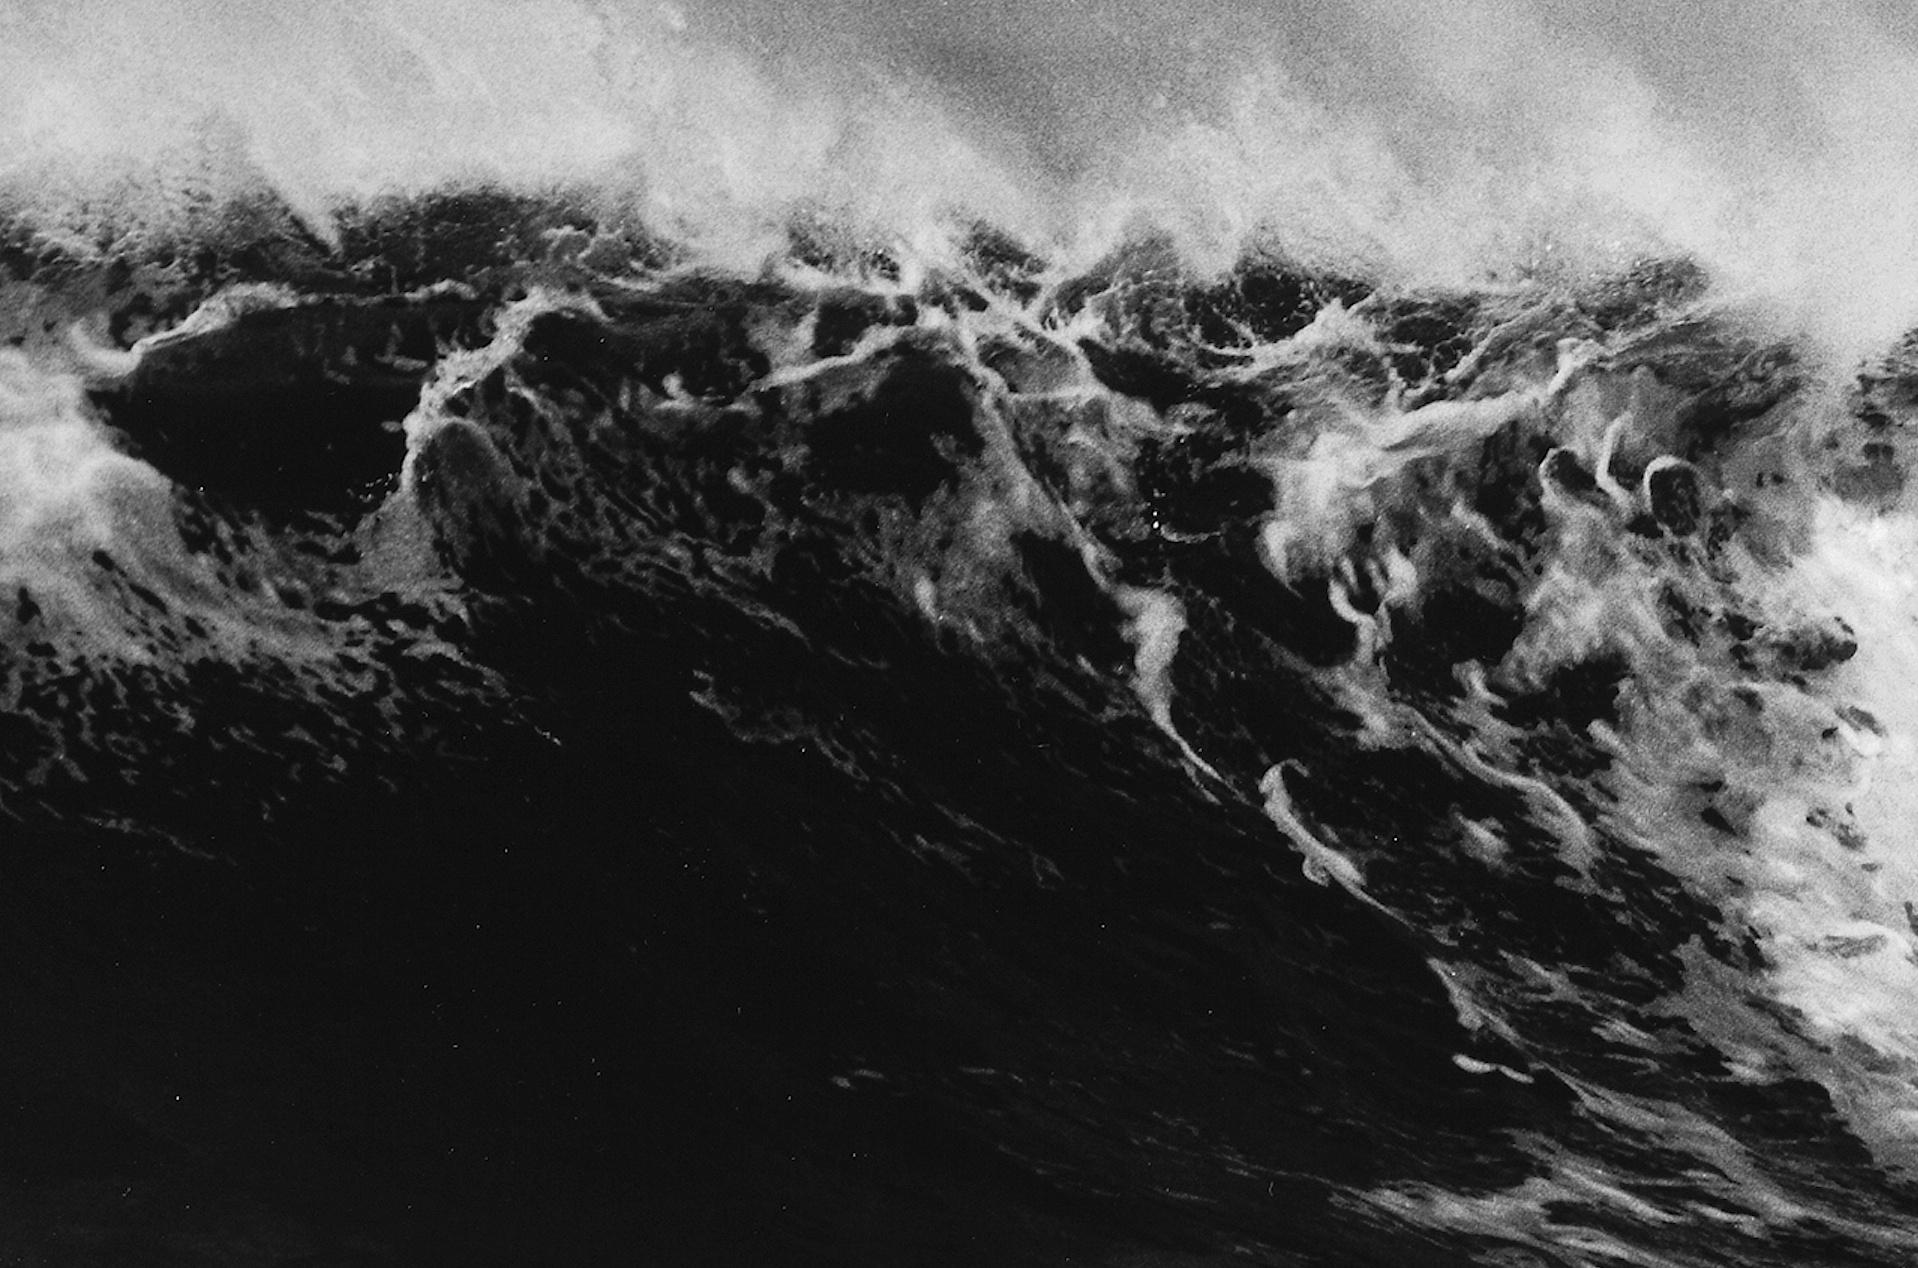 Anthony FRIEDKIN (*1949, America)
Palomino Wave, Carmel, California, U.S.A., 2004
Silver Gelatin Print, later print
40.6 x 50.8 cm (16 x 20 in.)
Edition of 25, Ed. no. 8/25
Print only

Born 1949 in Los Angeles, USA, Friedkin currently lives and